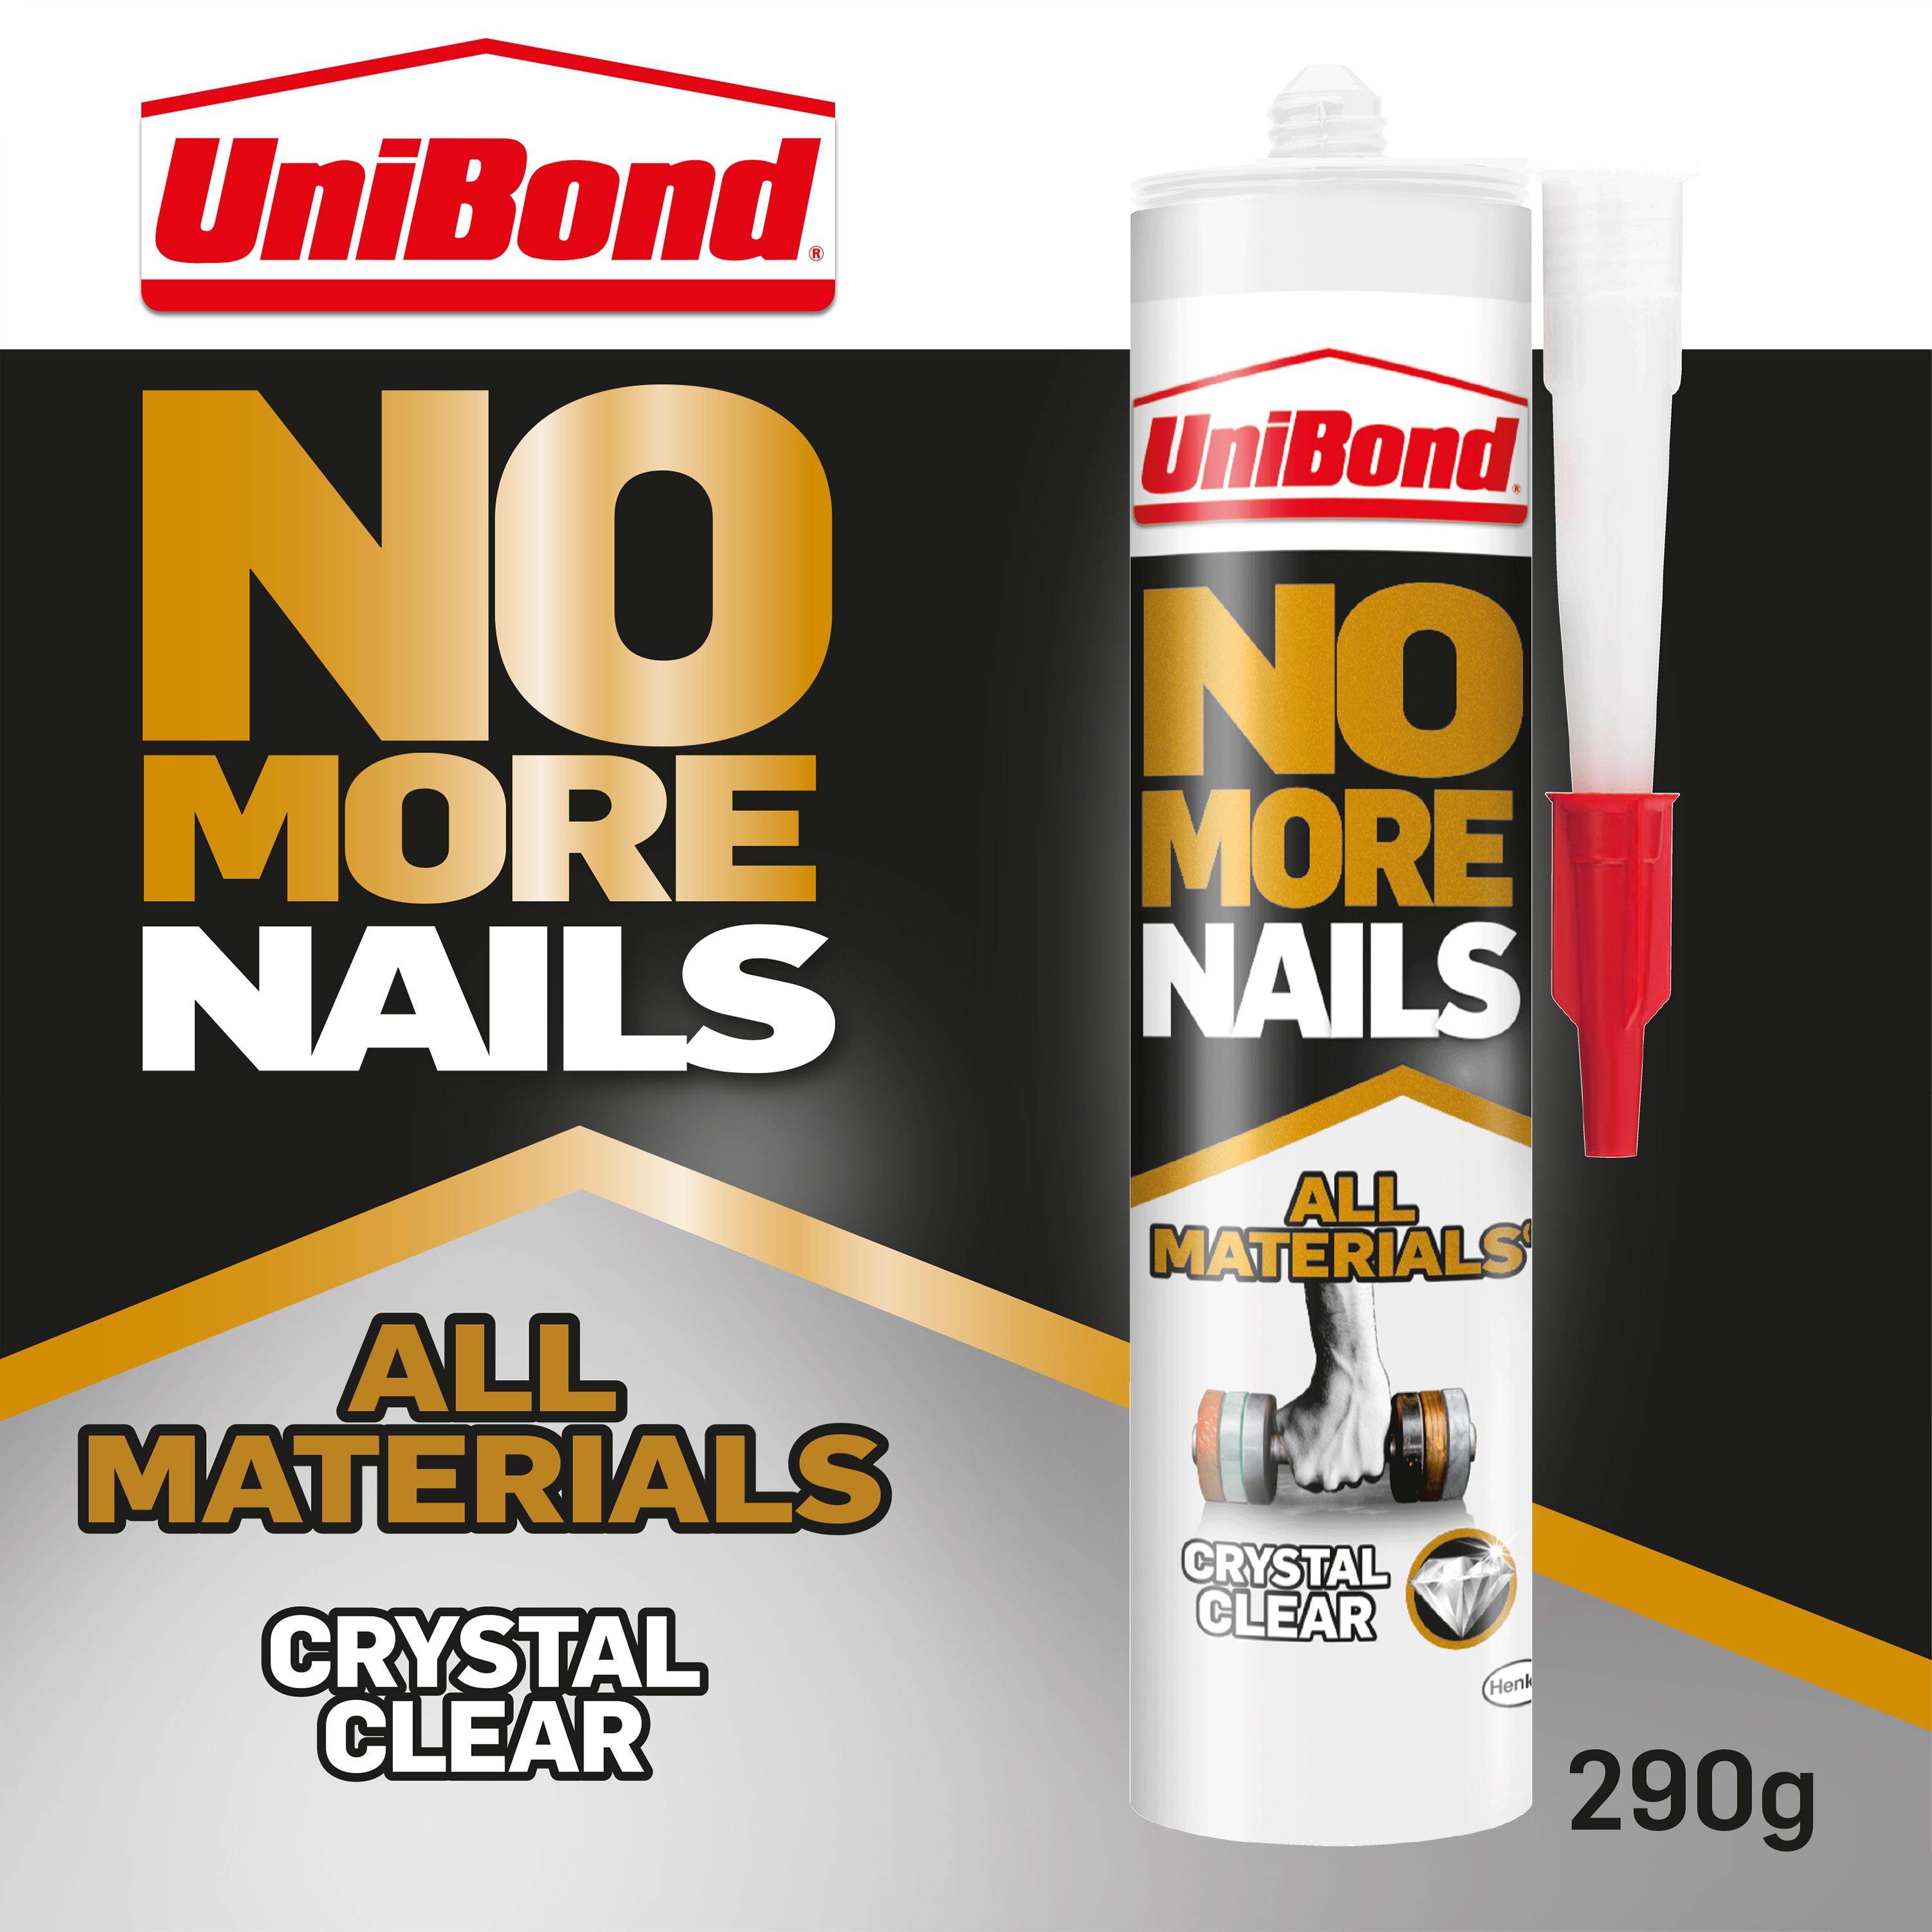 UniBond No More Nails Water resistant Solvent-free Crystal Clear All materials Grab adhesive 290g 0.29kg